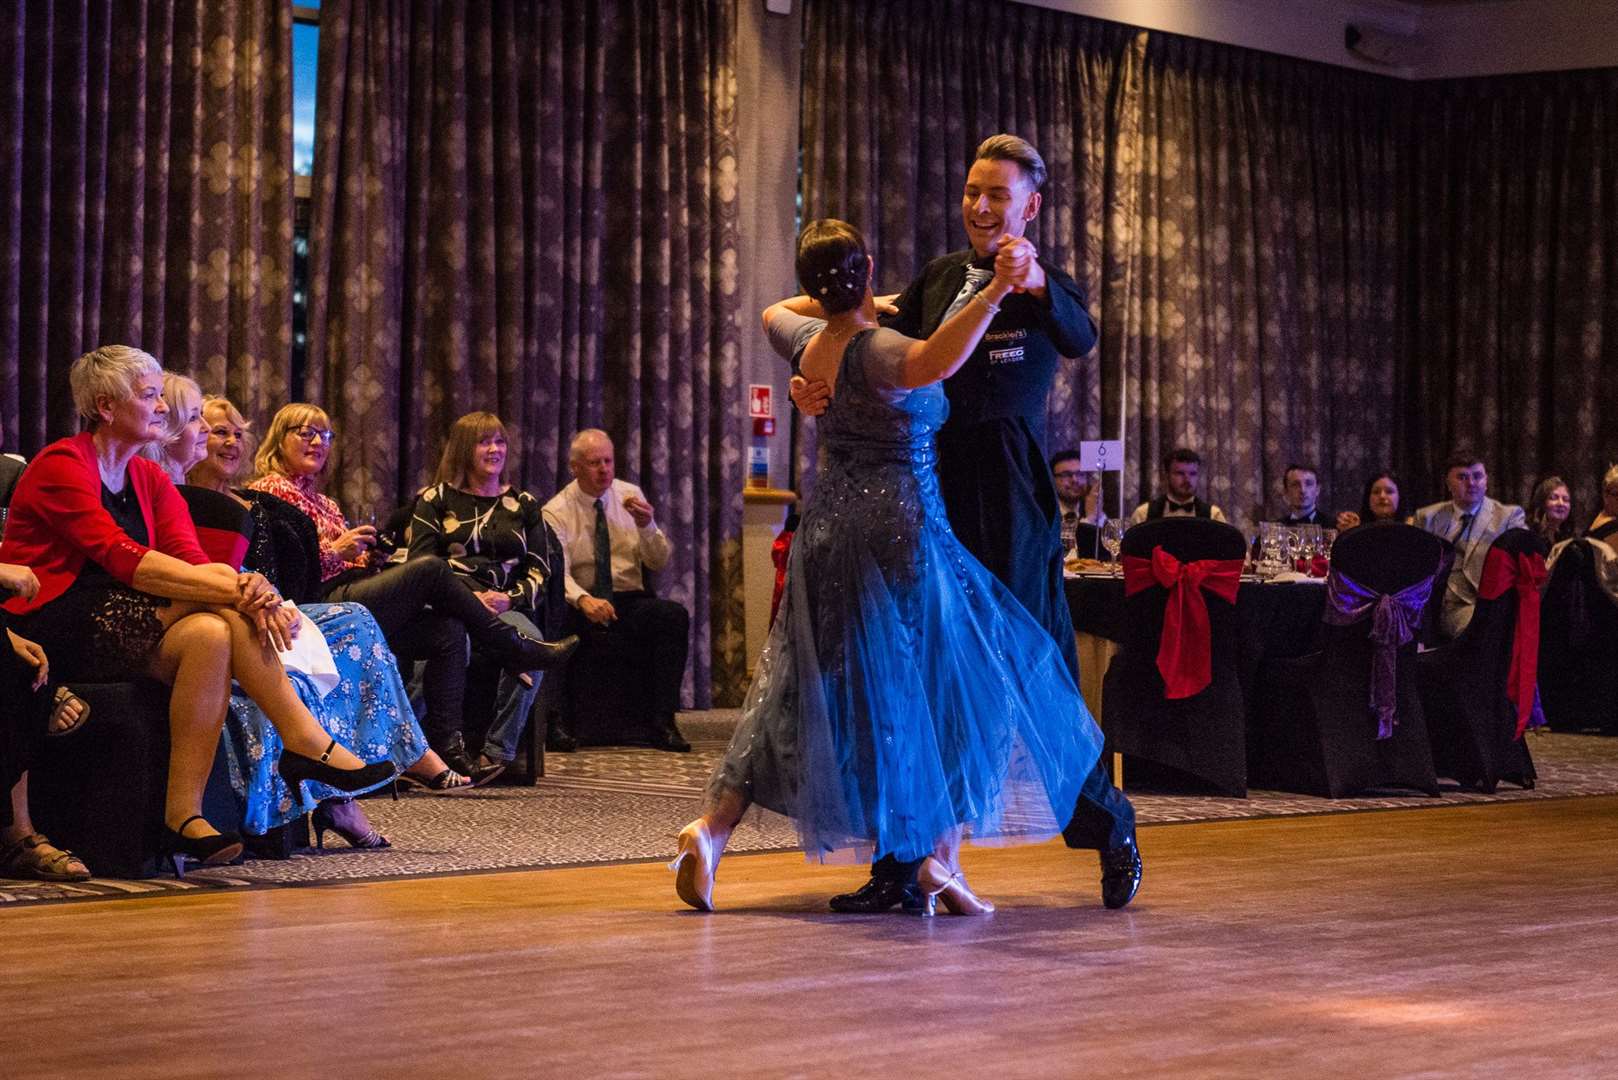 Rachel Murray and James Cook show off their skills at Come Dancing with Poppyscotland,